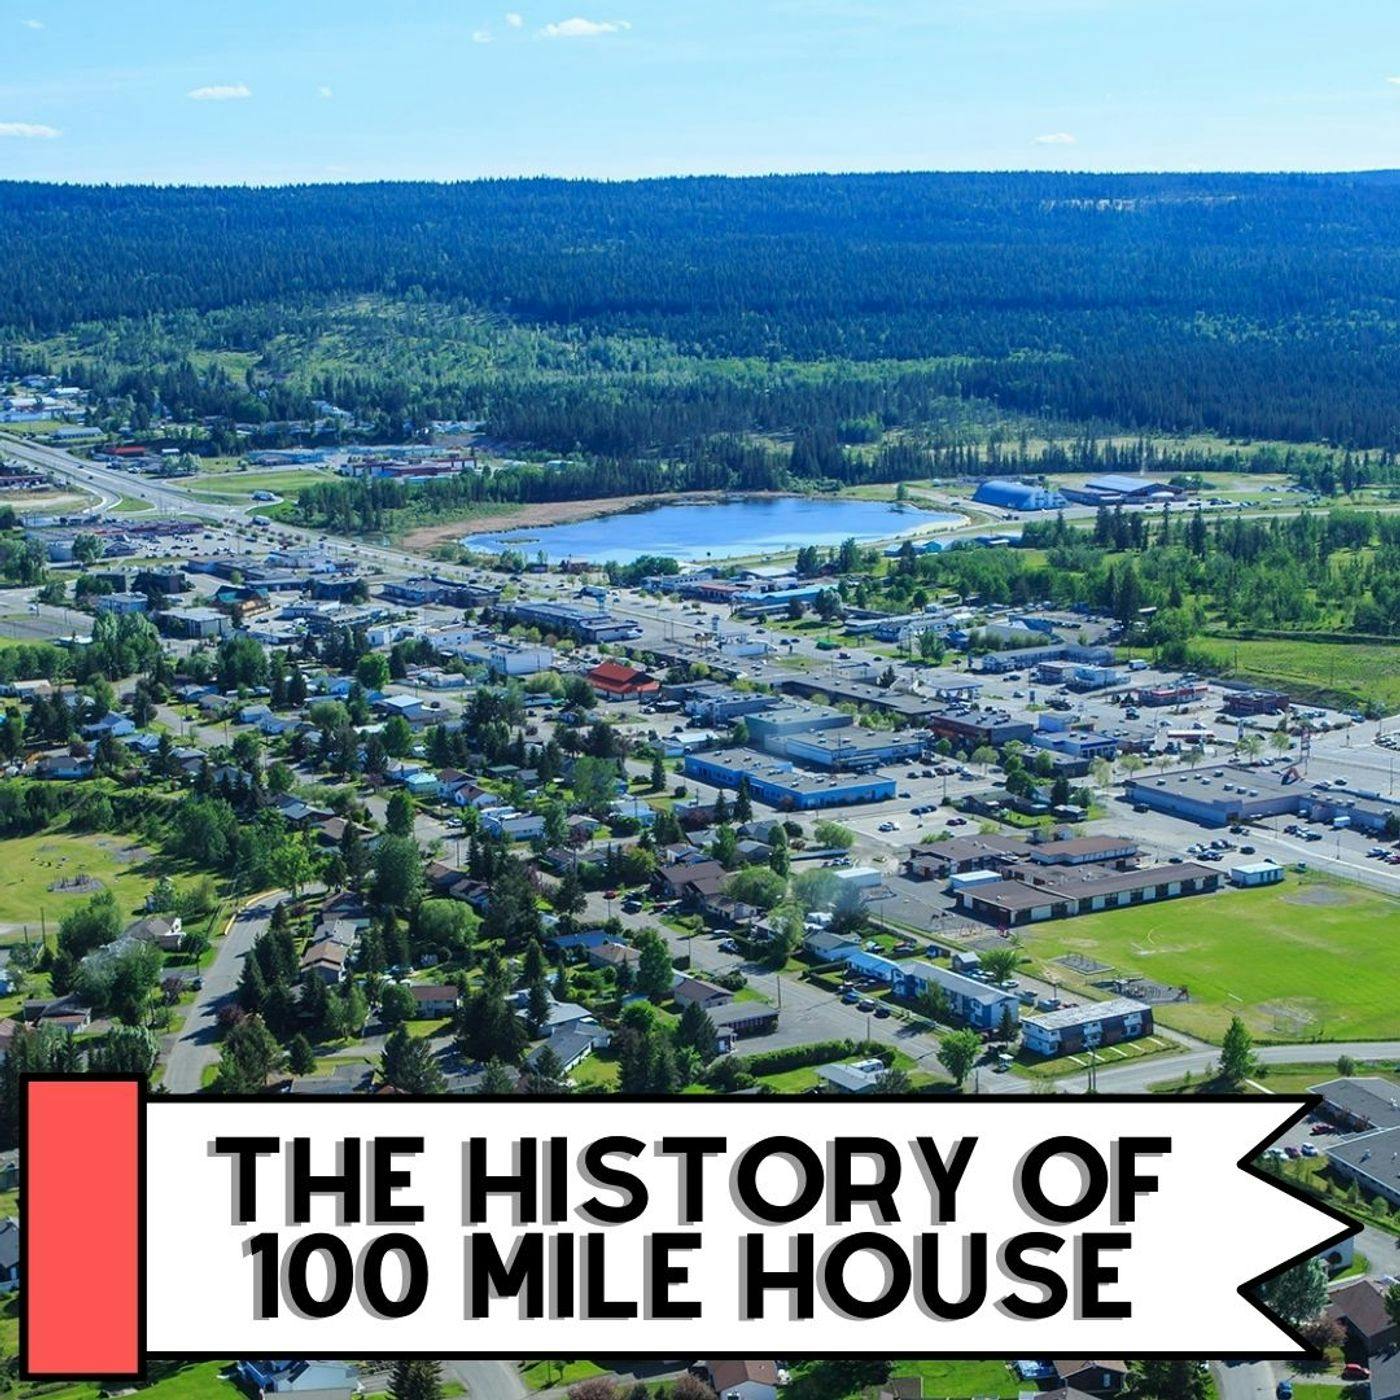 The History of 100 Mile House